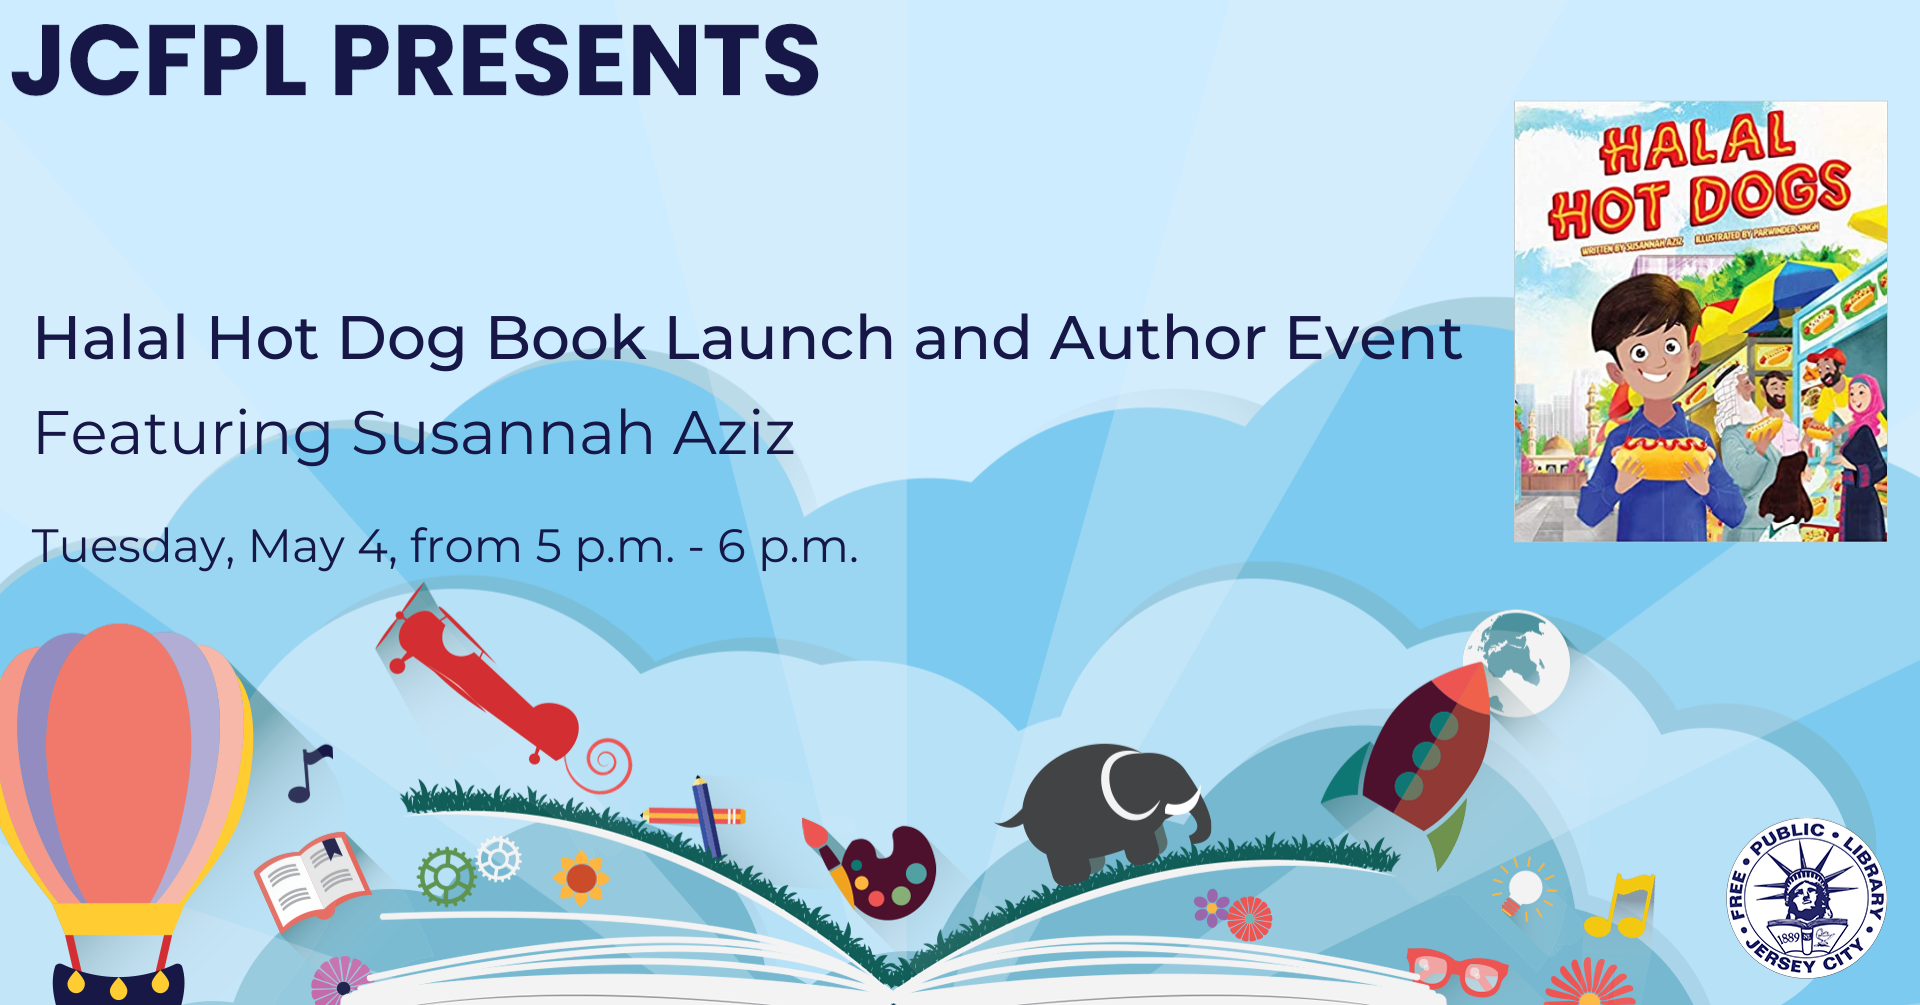 Halal Hot Dog Book Launch and Author Event